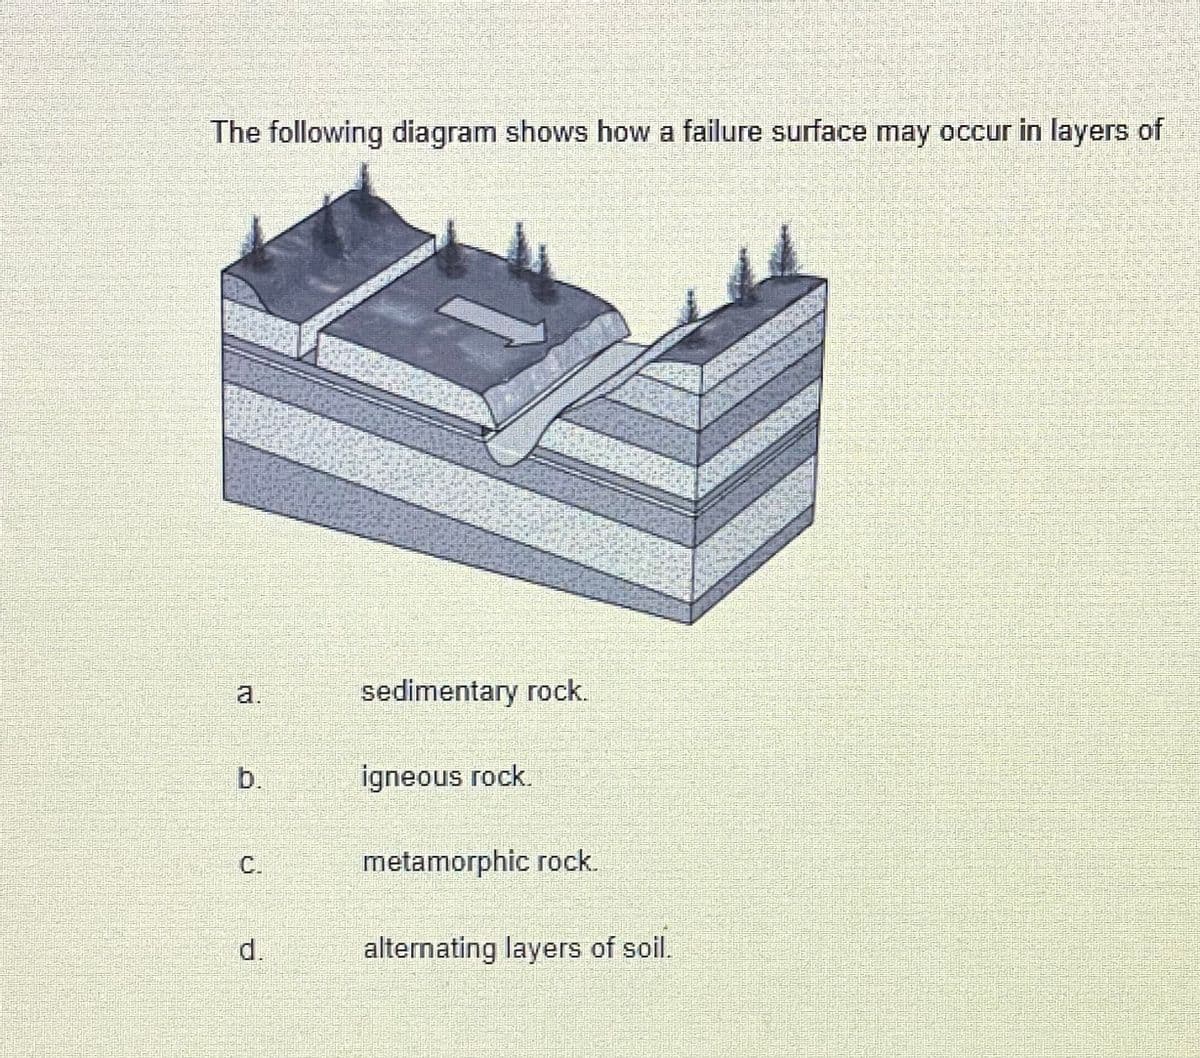 The following diagram shows how a failure surface may occur in layers of
a.
sedimentary rock.
b.
igneous rock.
C.
metamorphic rock.
d.
alternating layers of soil.
